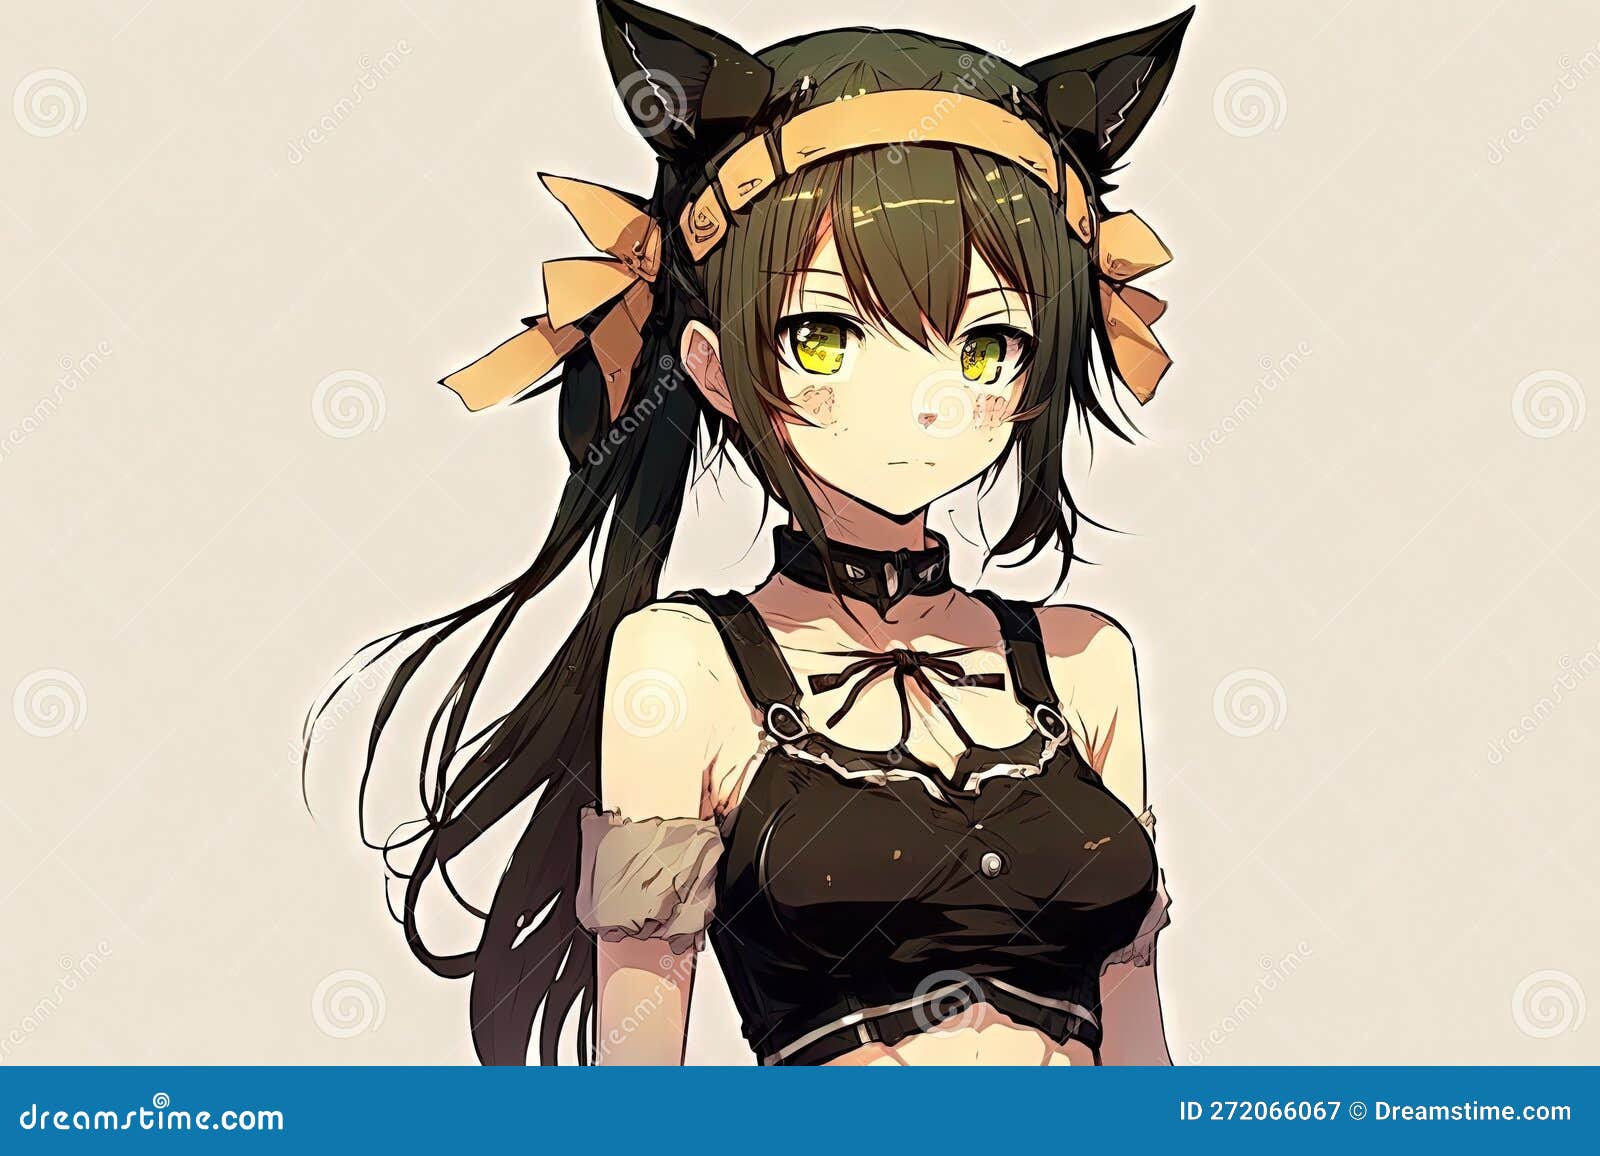 Cat ear anime characters